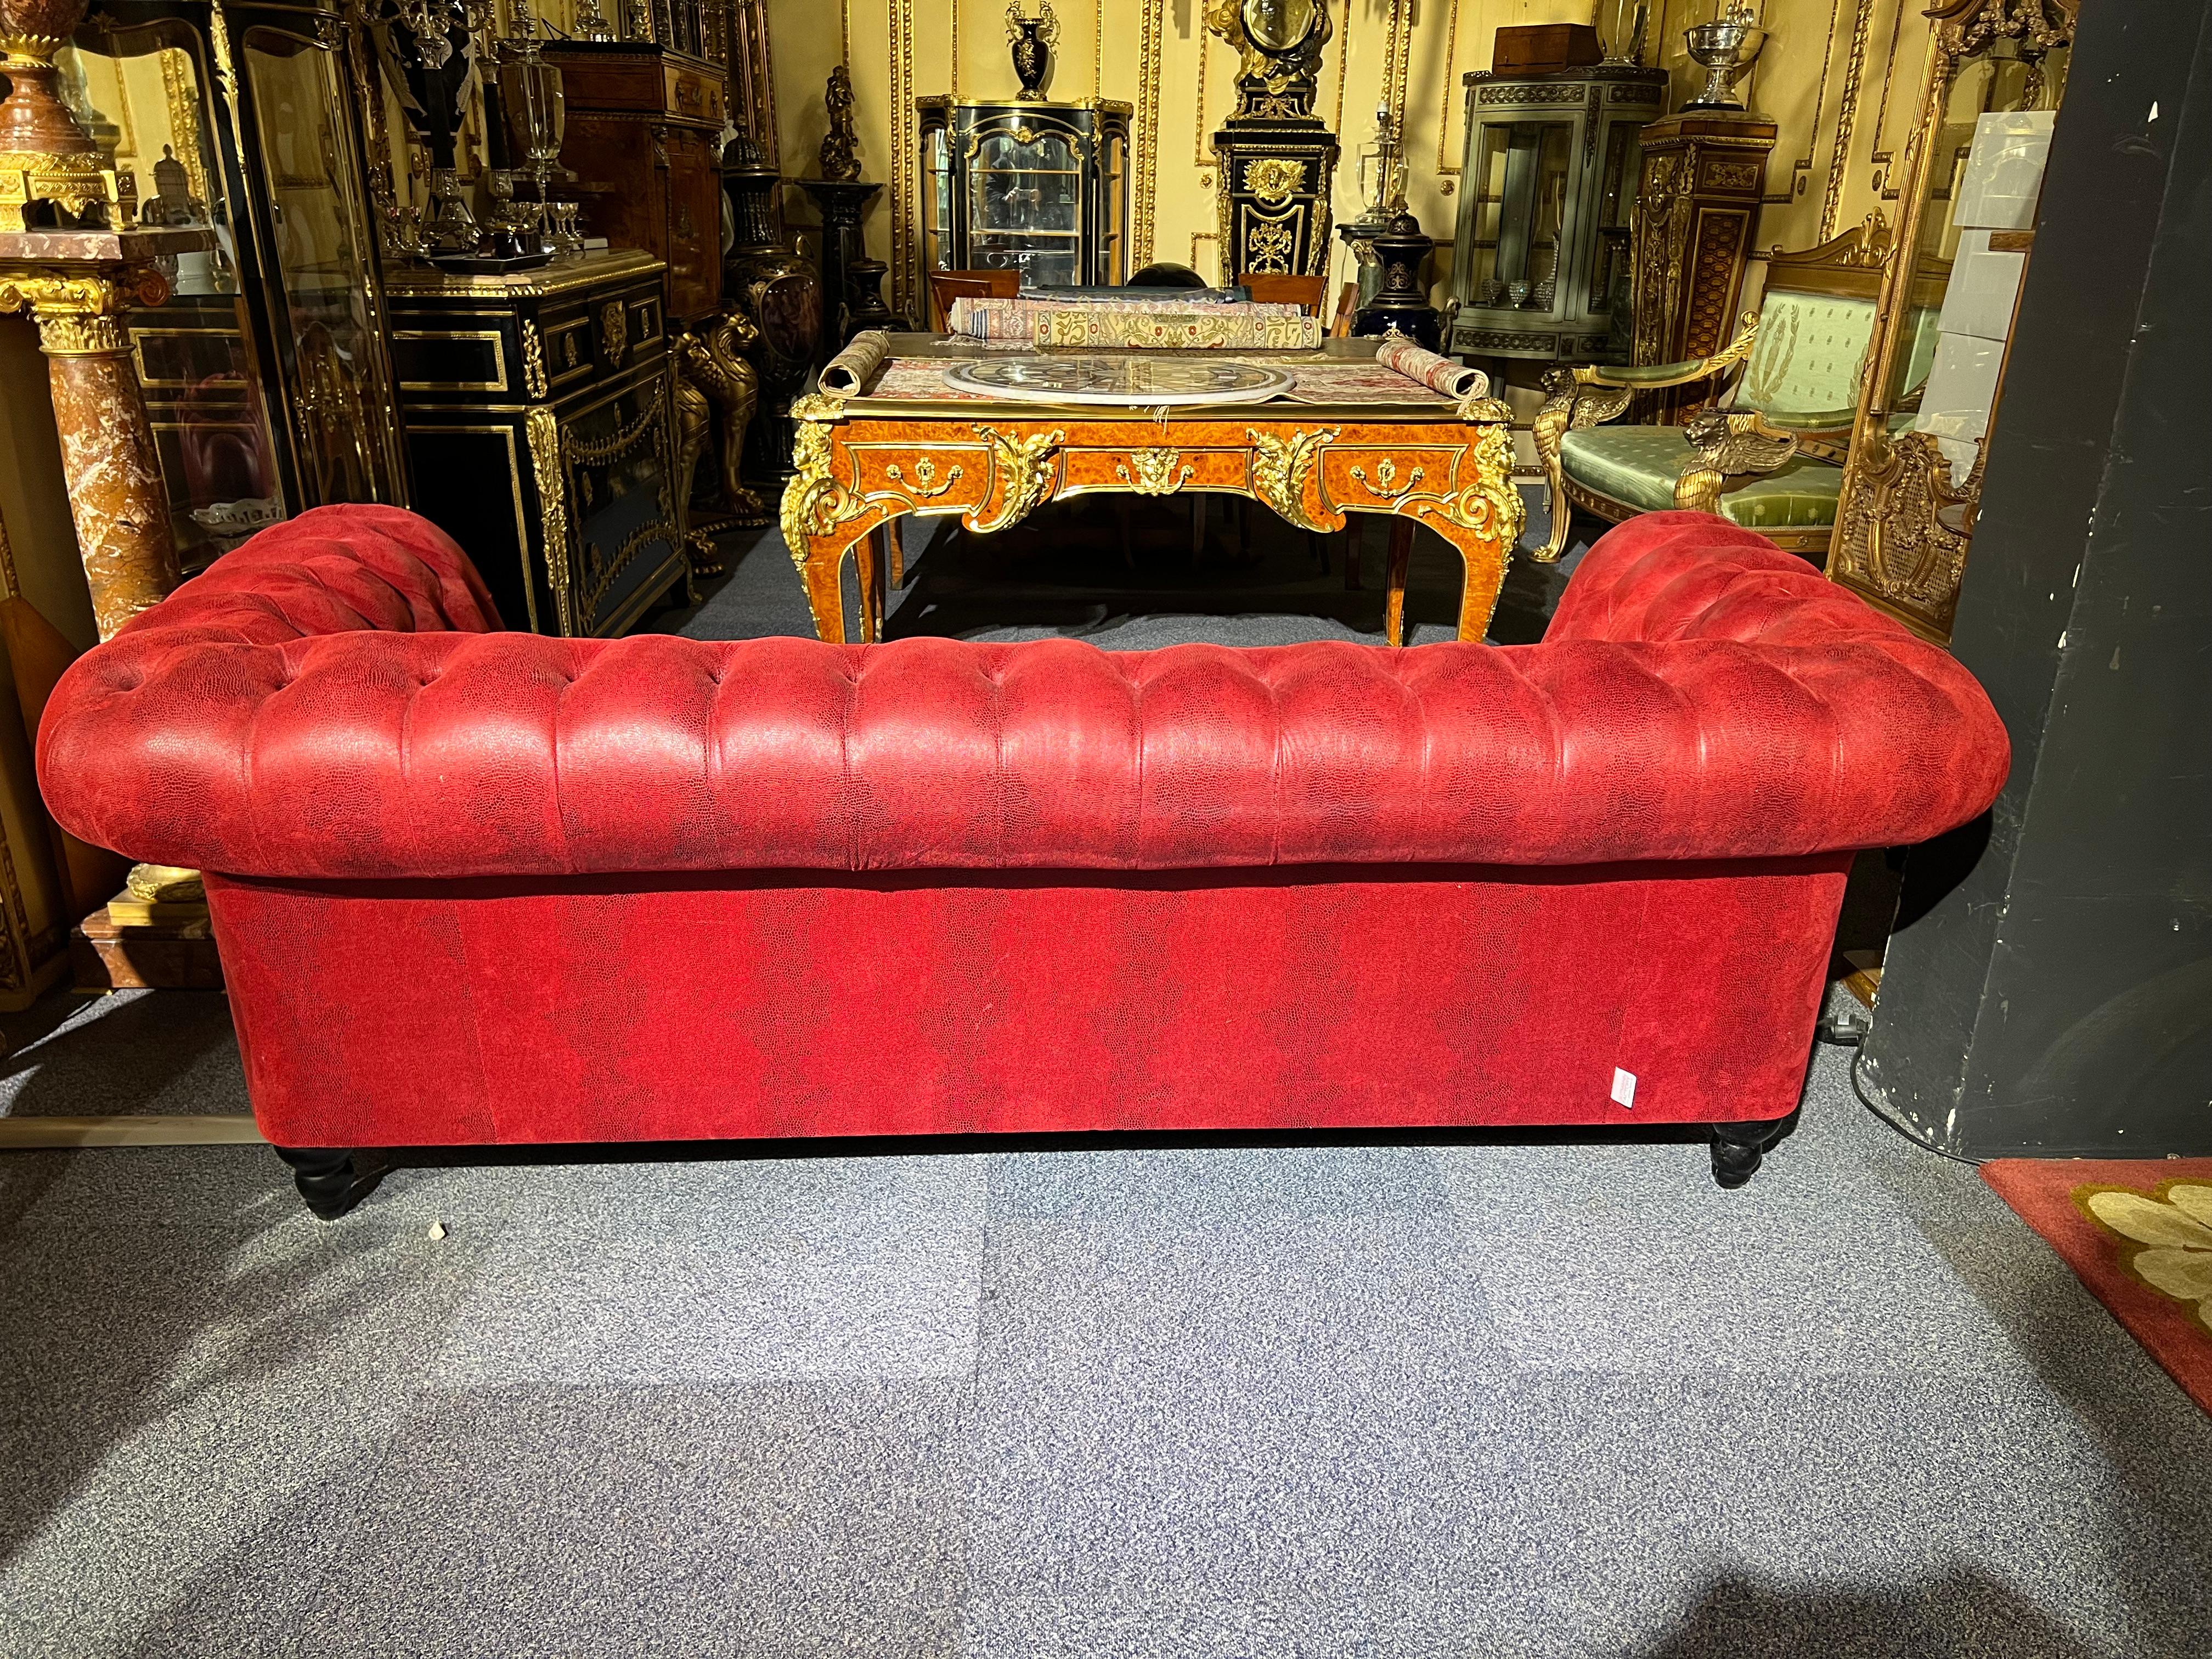 Sofa / Couch Chesterfield Luxury Baroque Style Design Velvet Red Alcantara Look For Sale 3